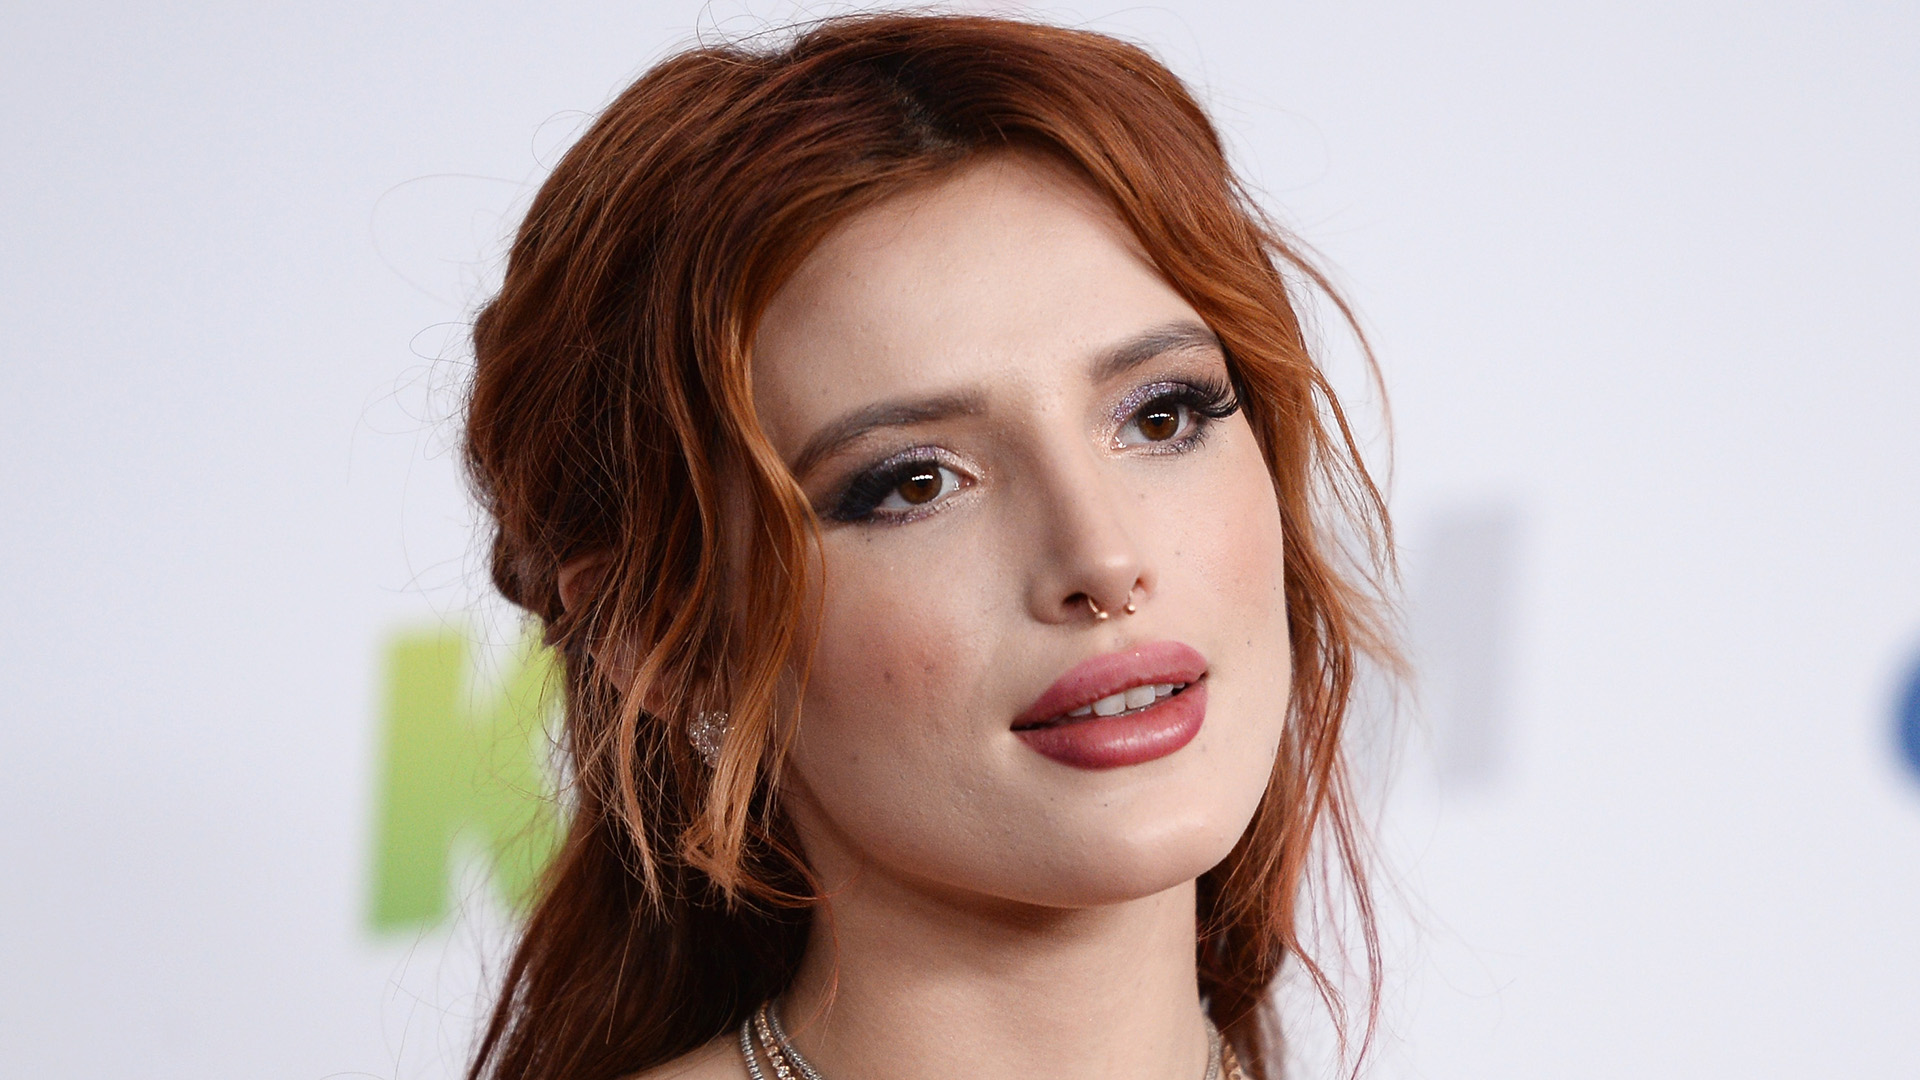 Bella Thorne Slams Claim She Made Up Sexual Abuse Story